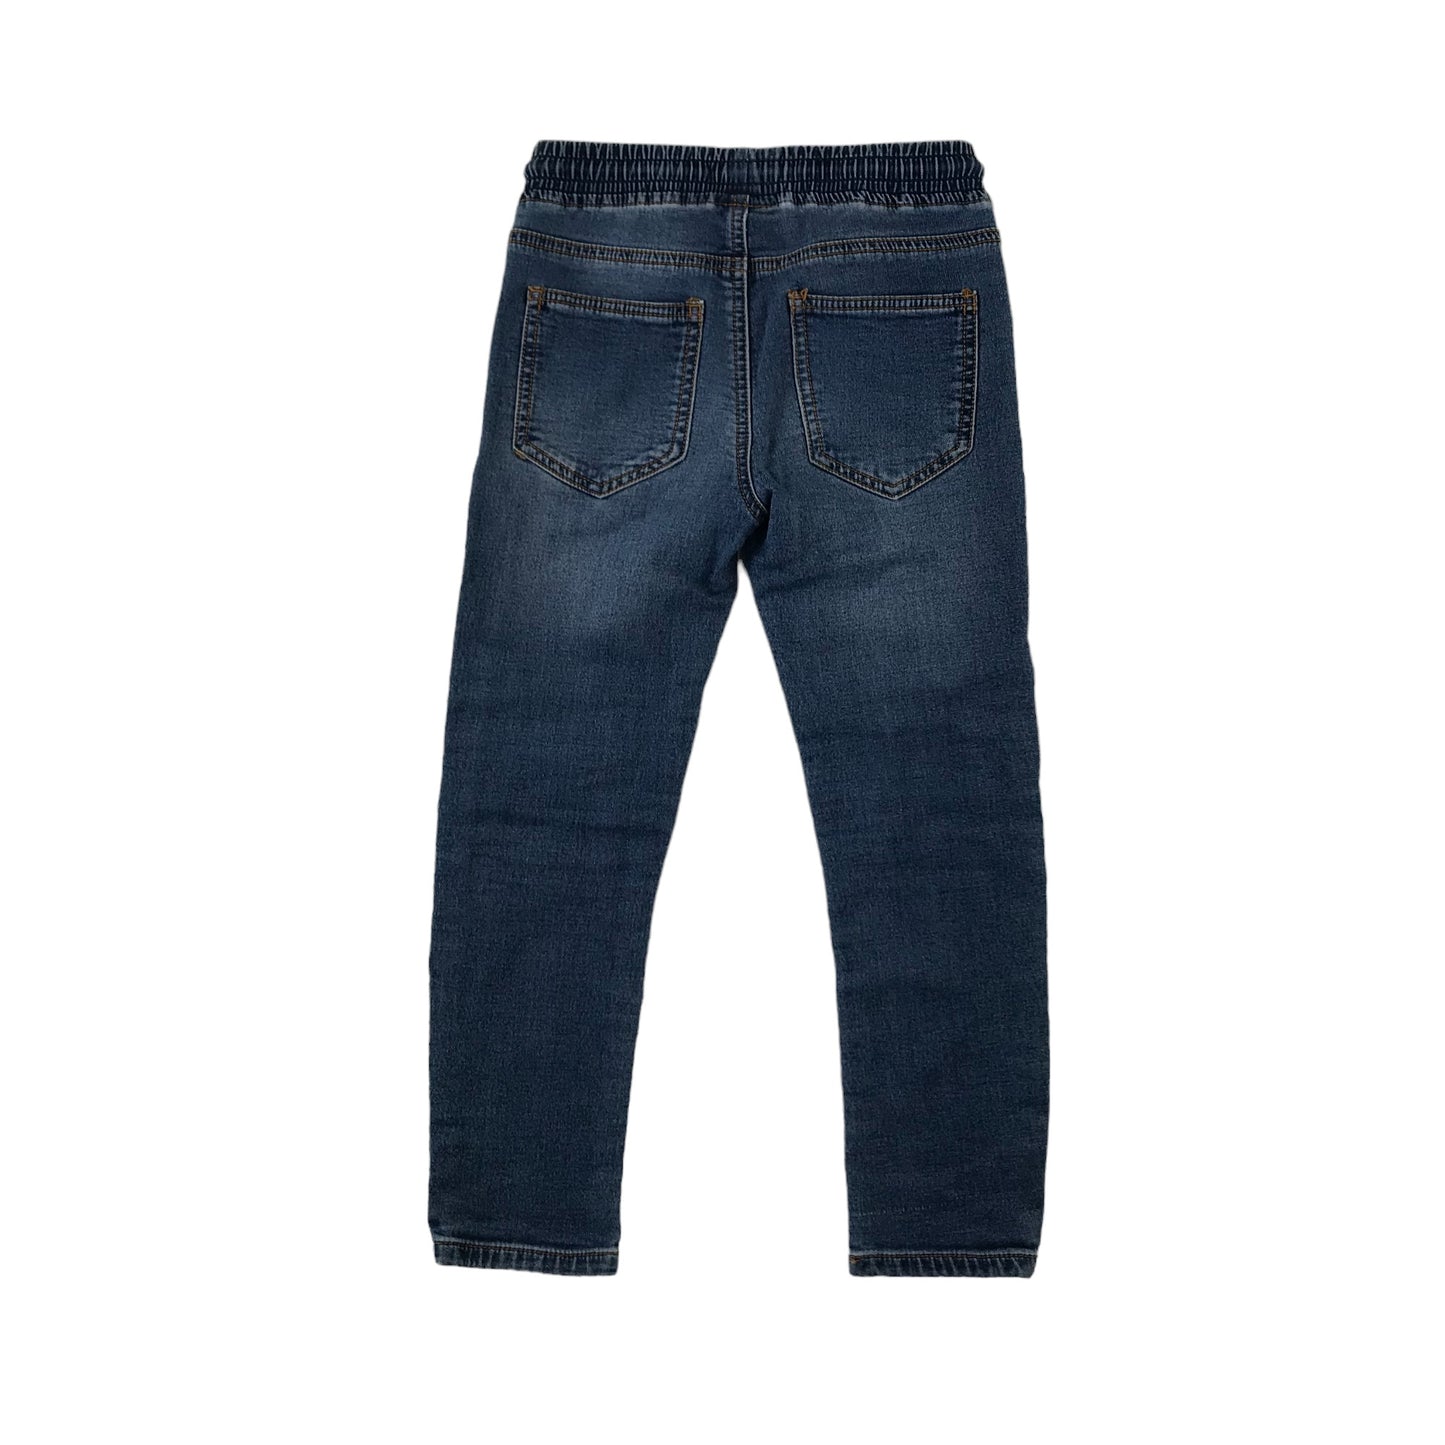 Next jeans 7 years blue stretchy skinny leg pull up jogger style